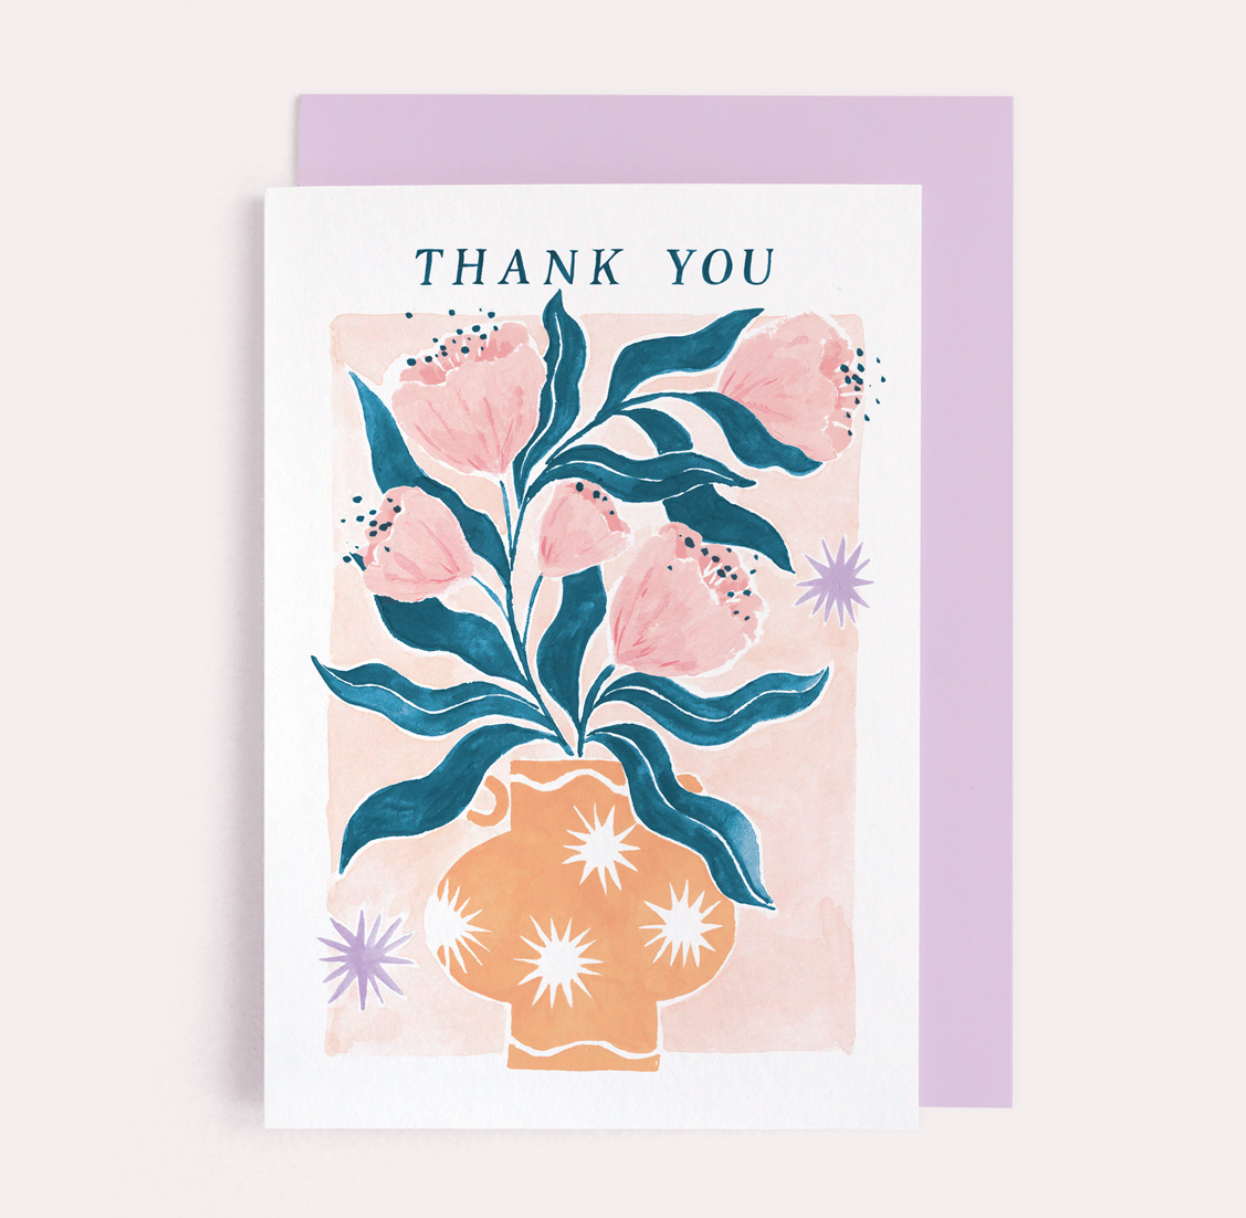 Thank You Vase + Flowers Card